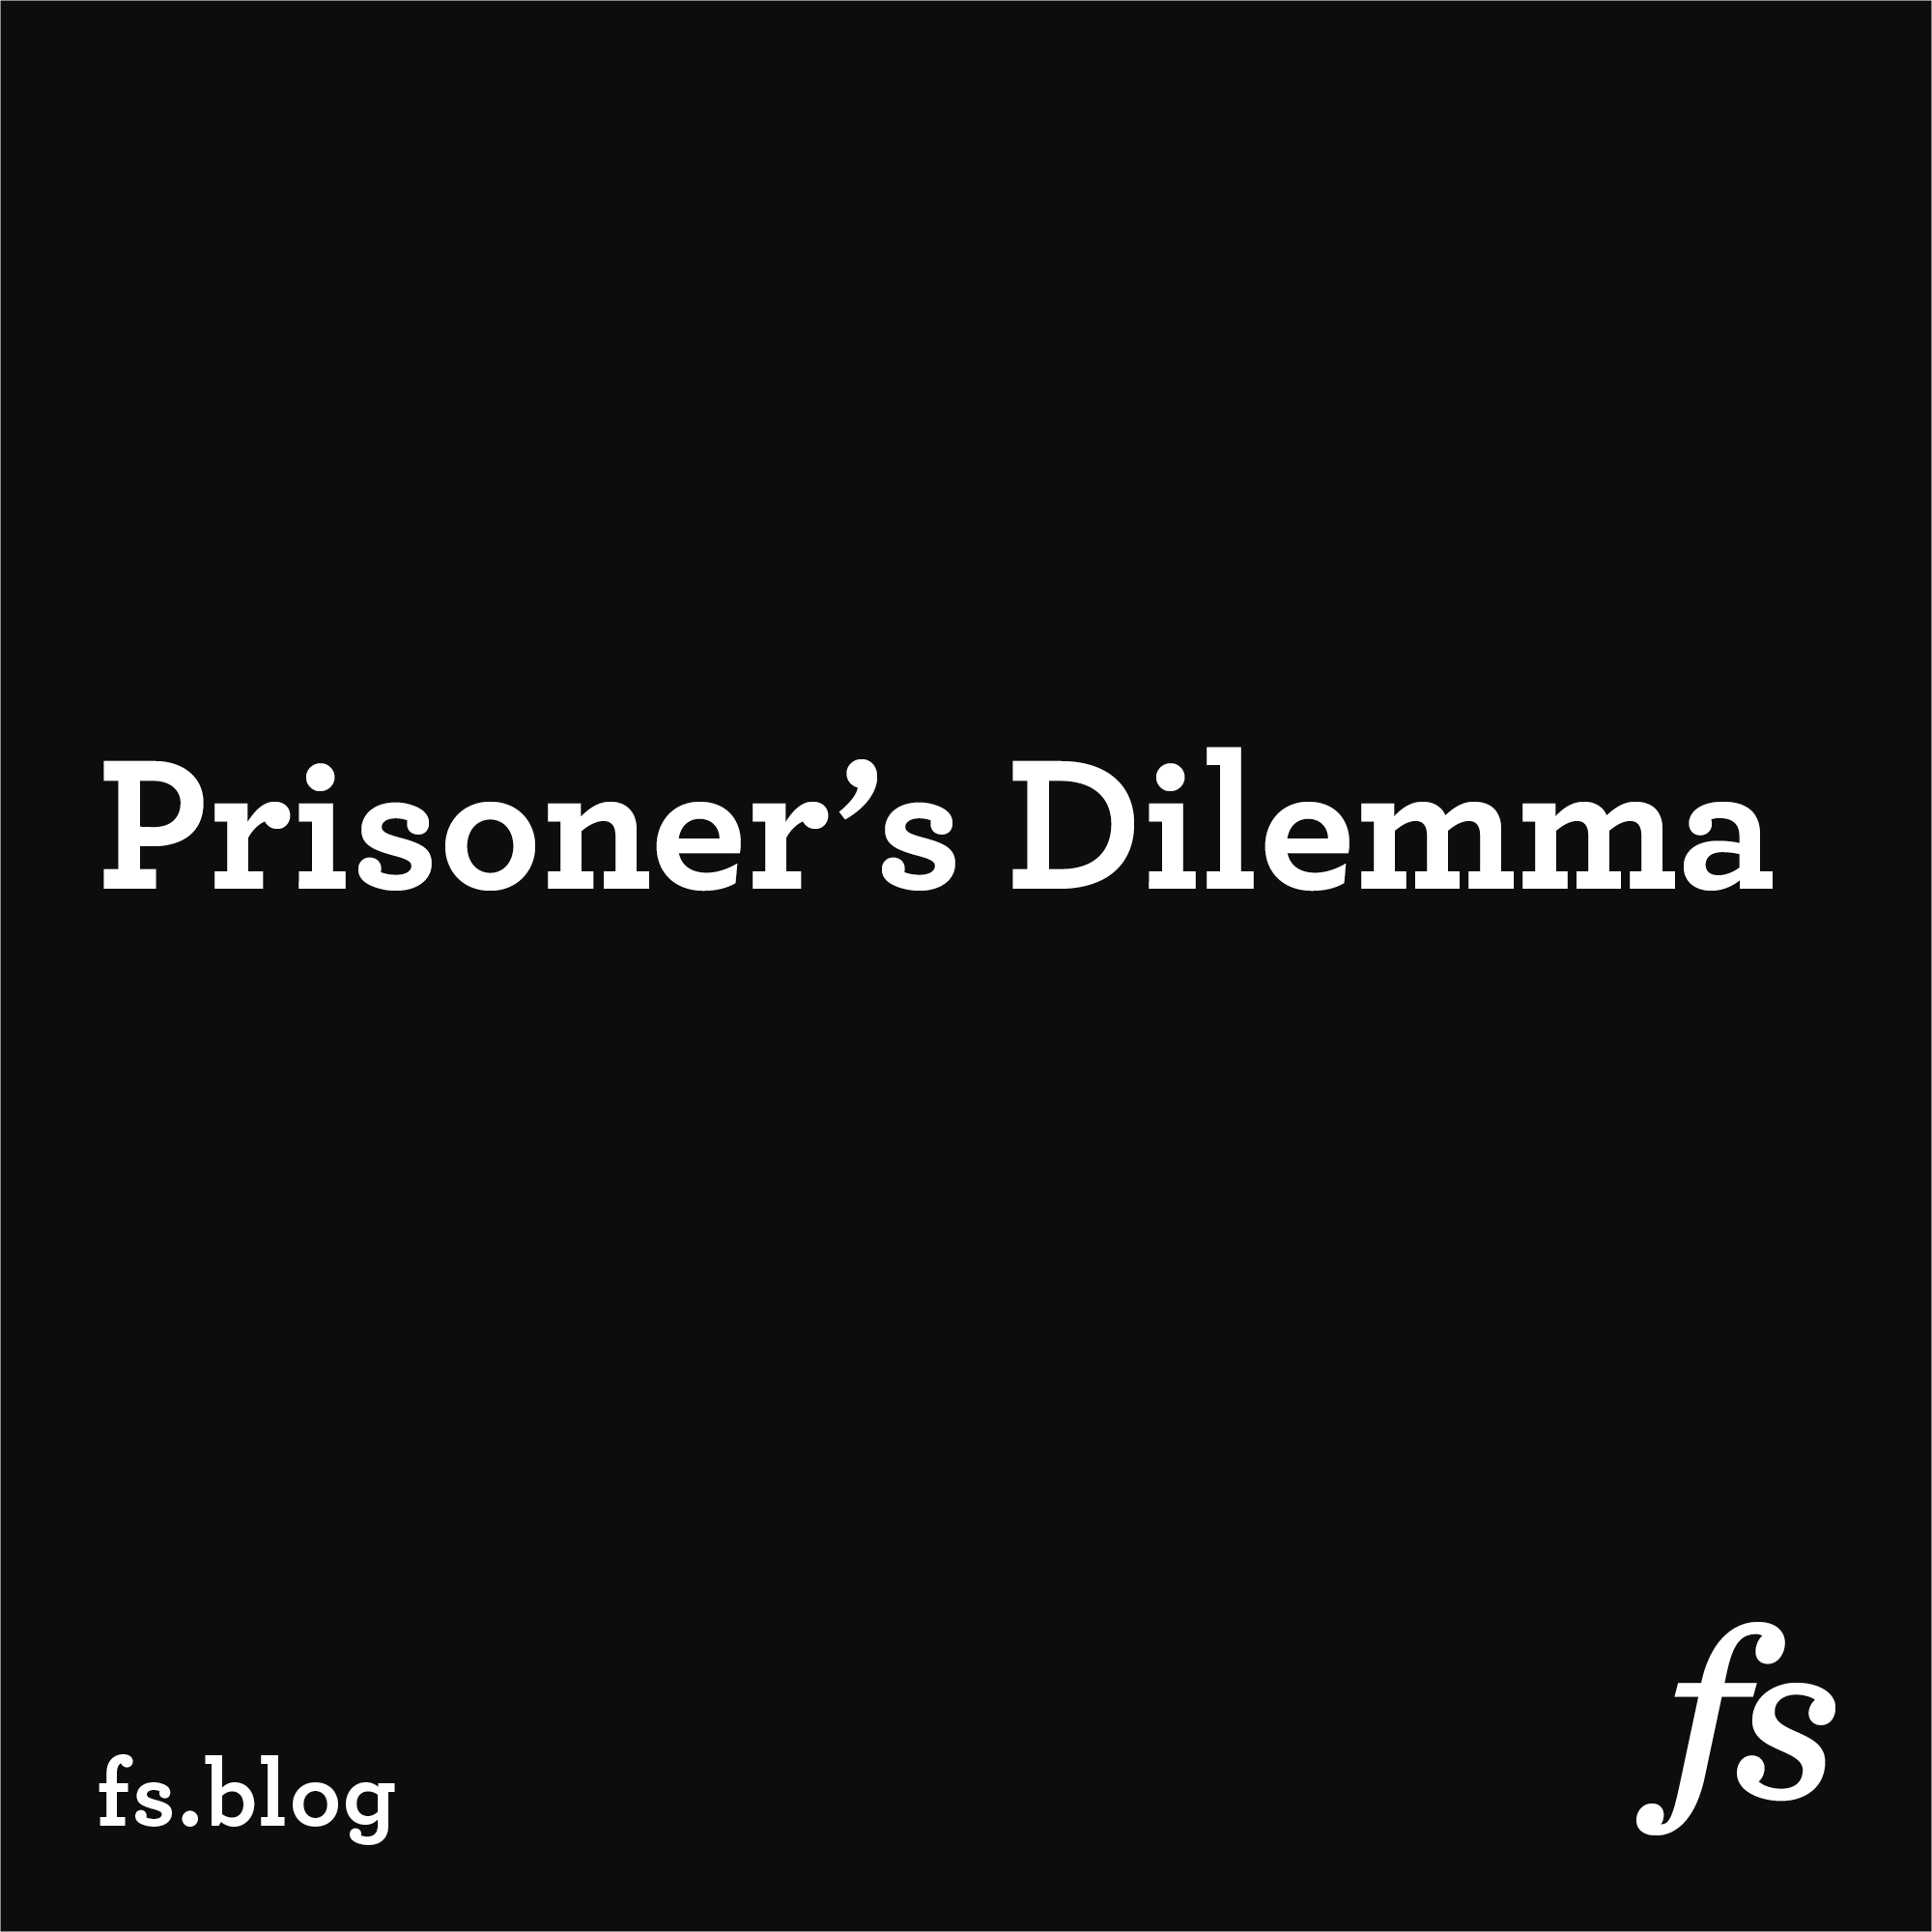 Prisoner’s Dilemma: Is Cooperation Always the Right Answer?